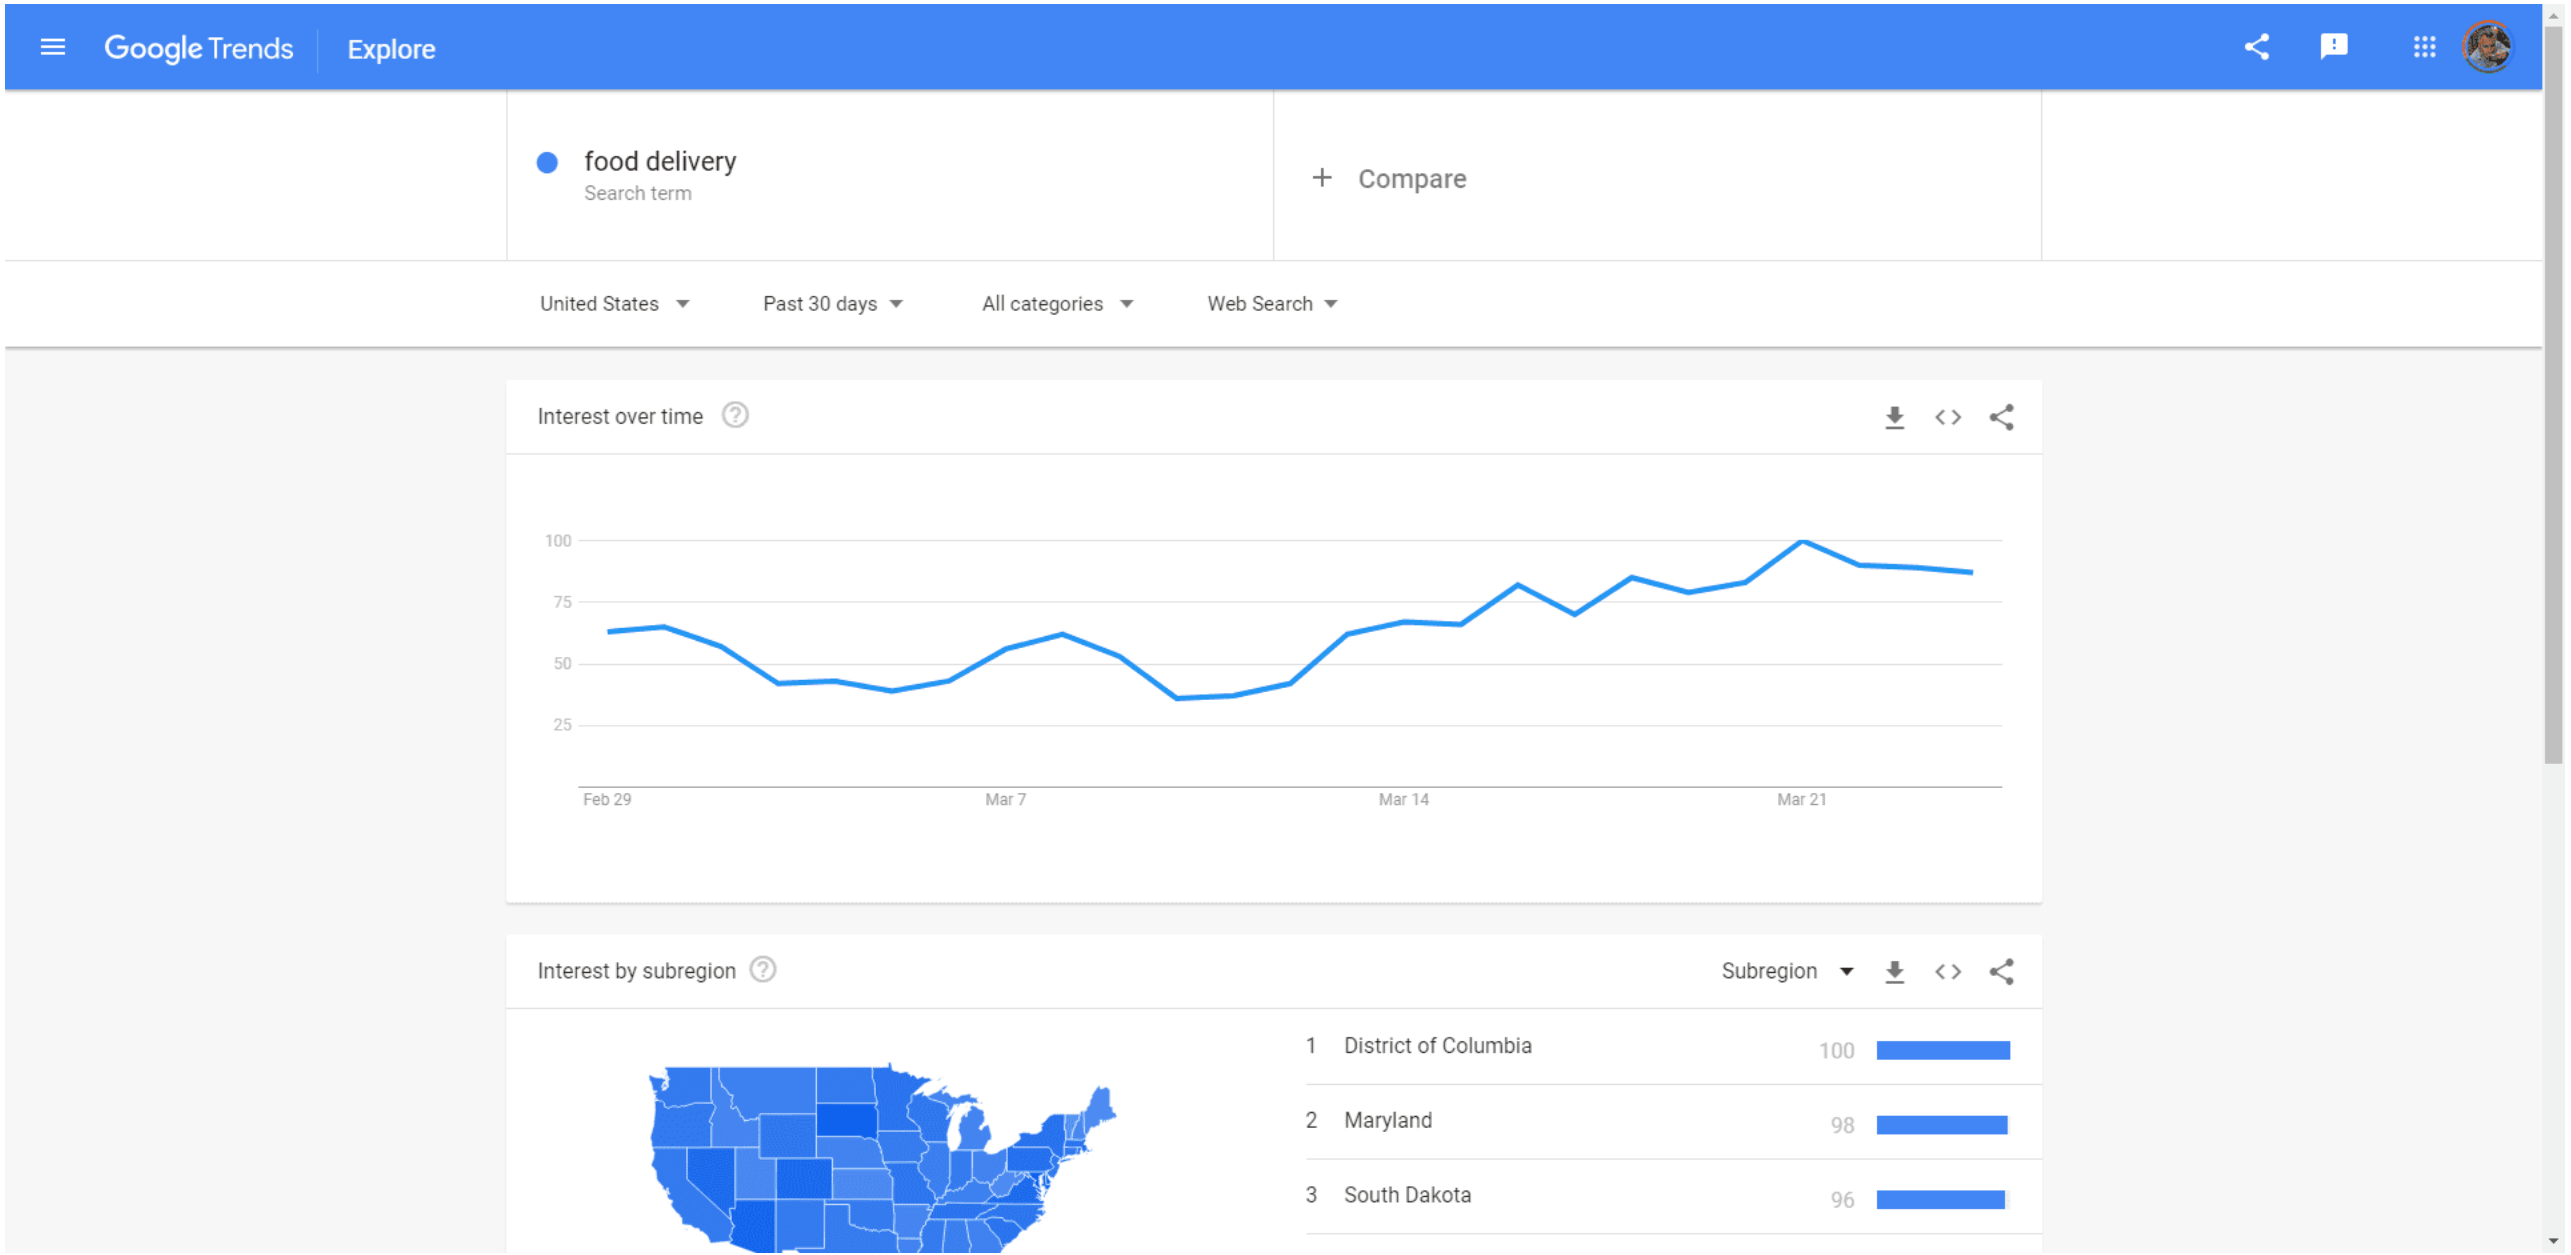 Google Trends food delivery searches